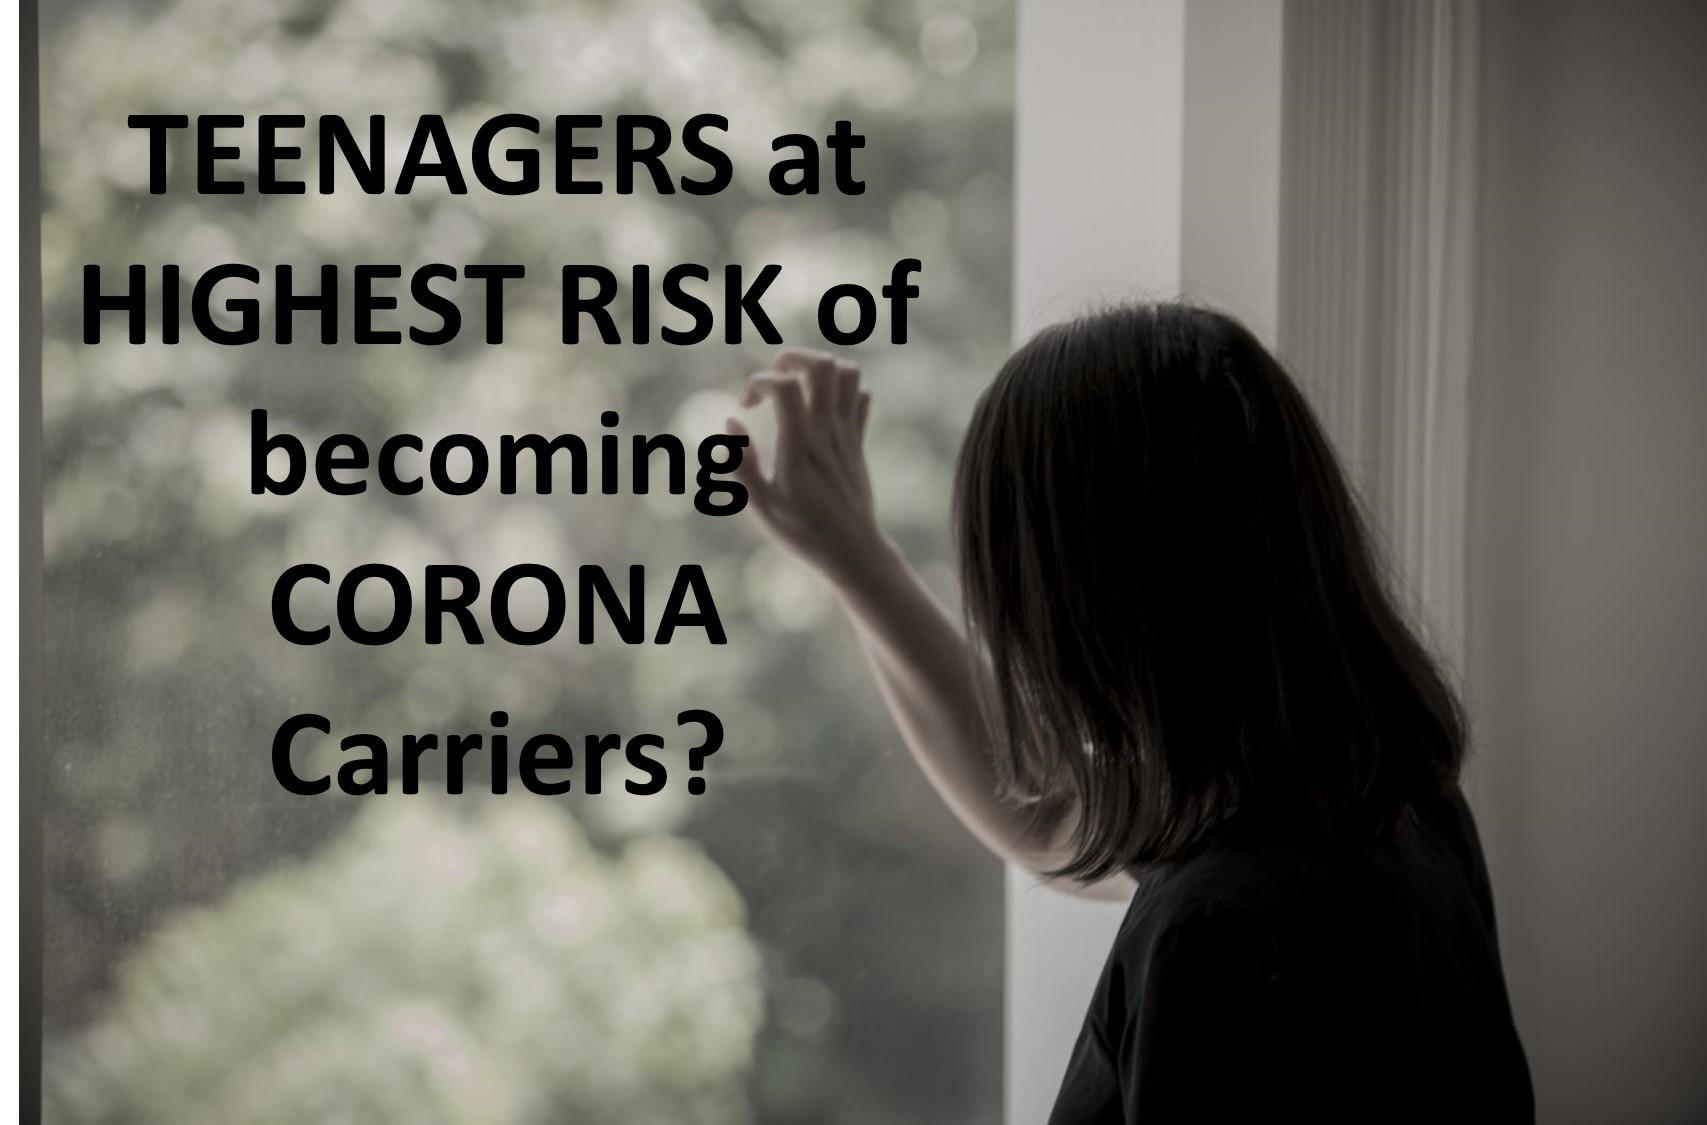 Tough times require tough measures - TEENAGERS might be highest risk carriers of Coronavirus